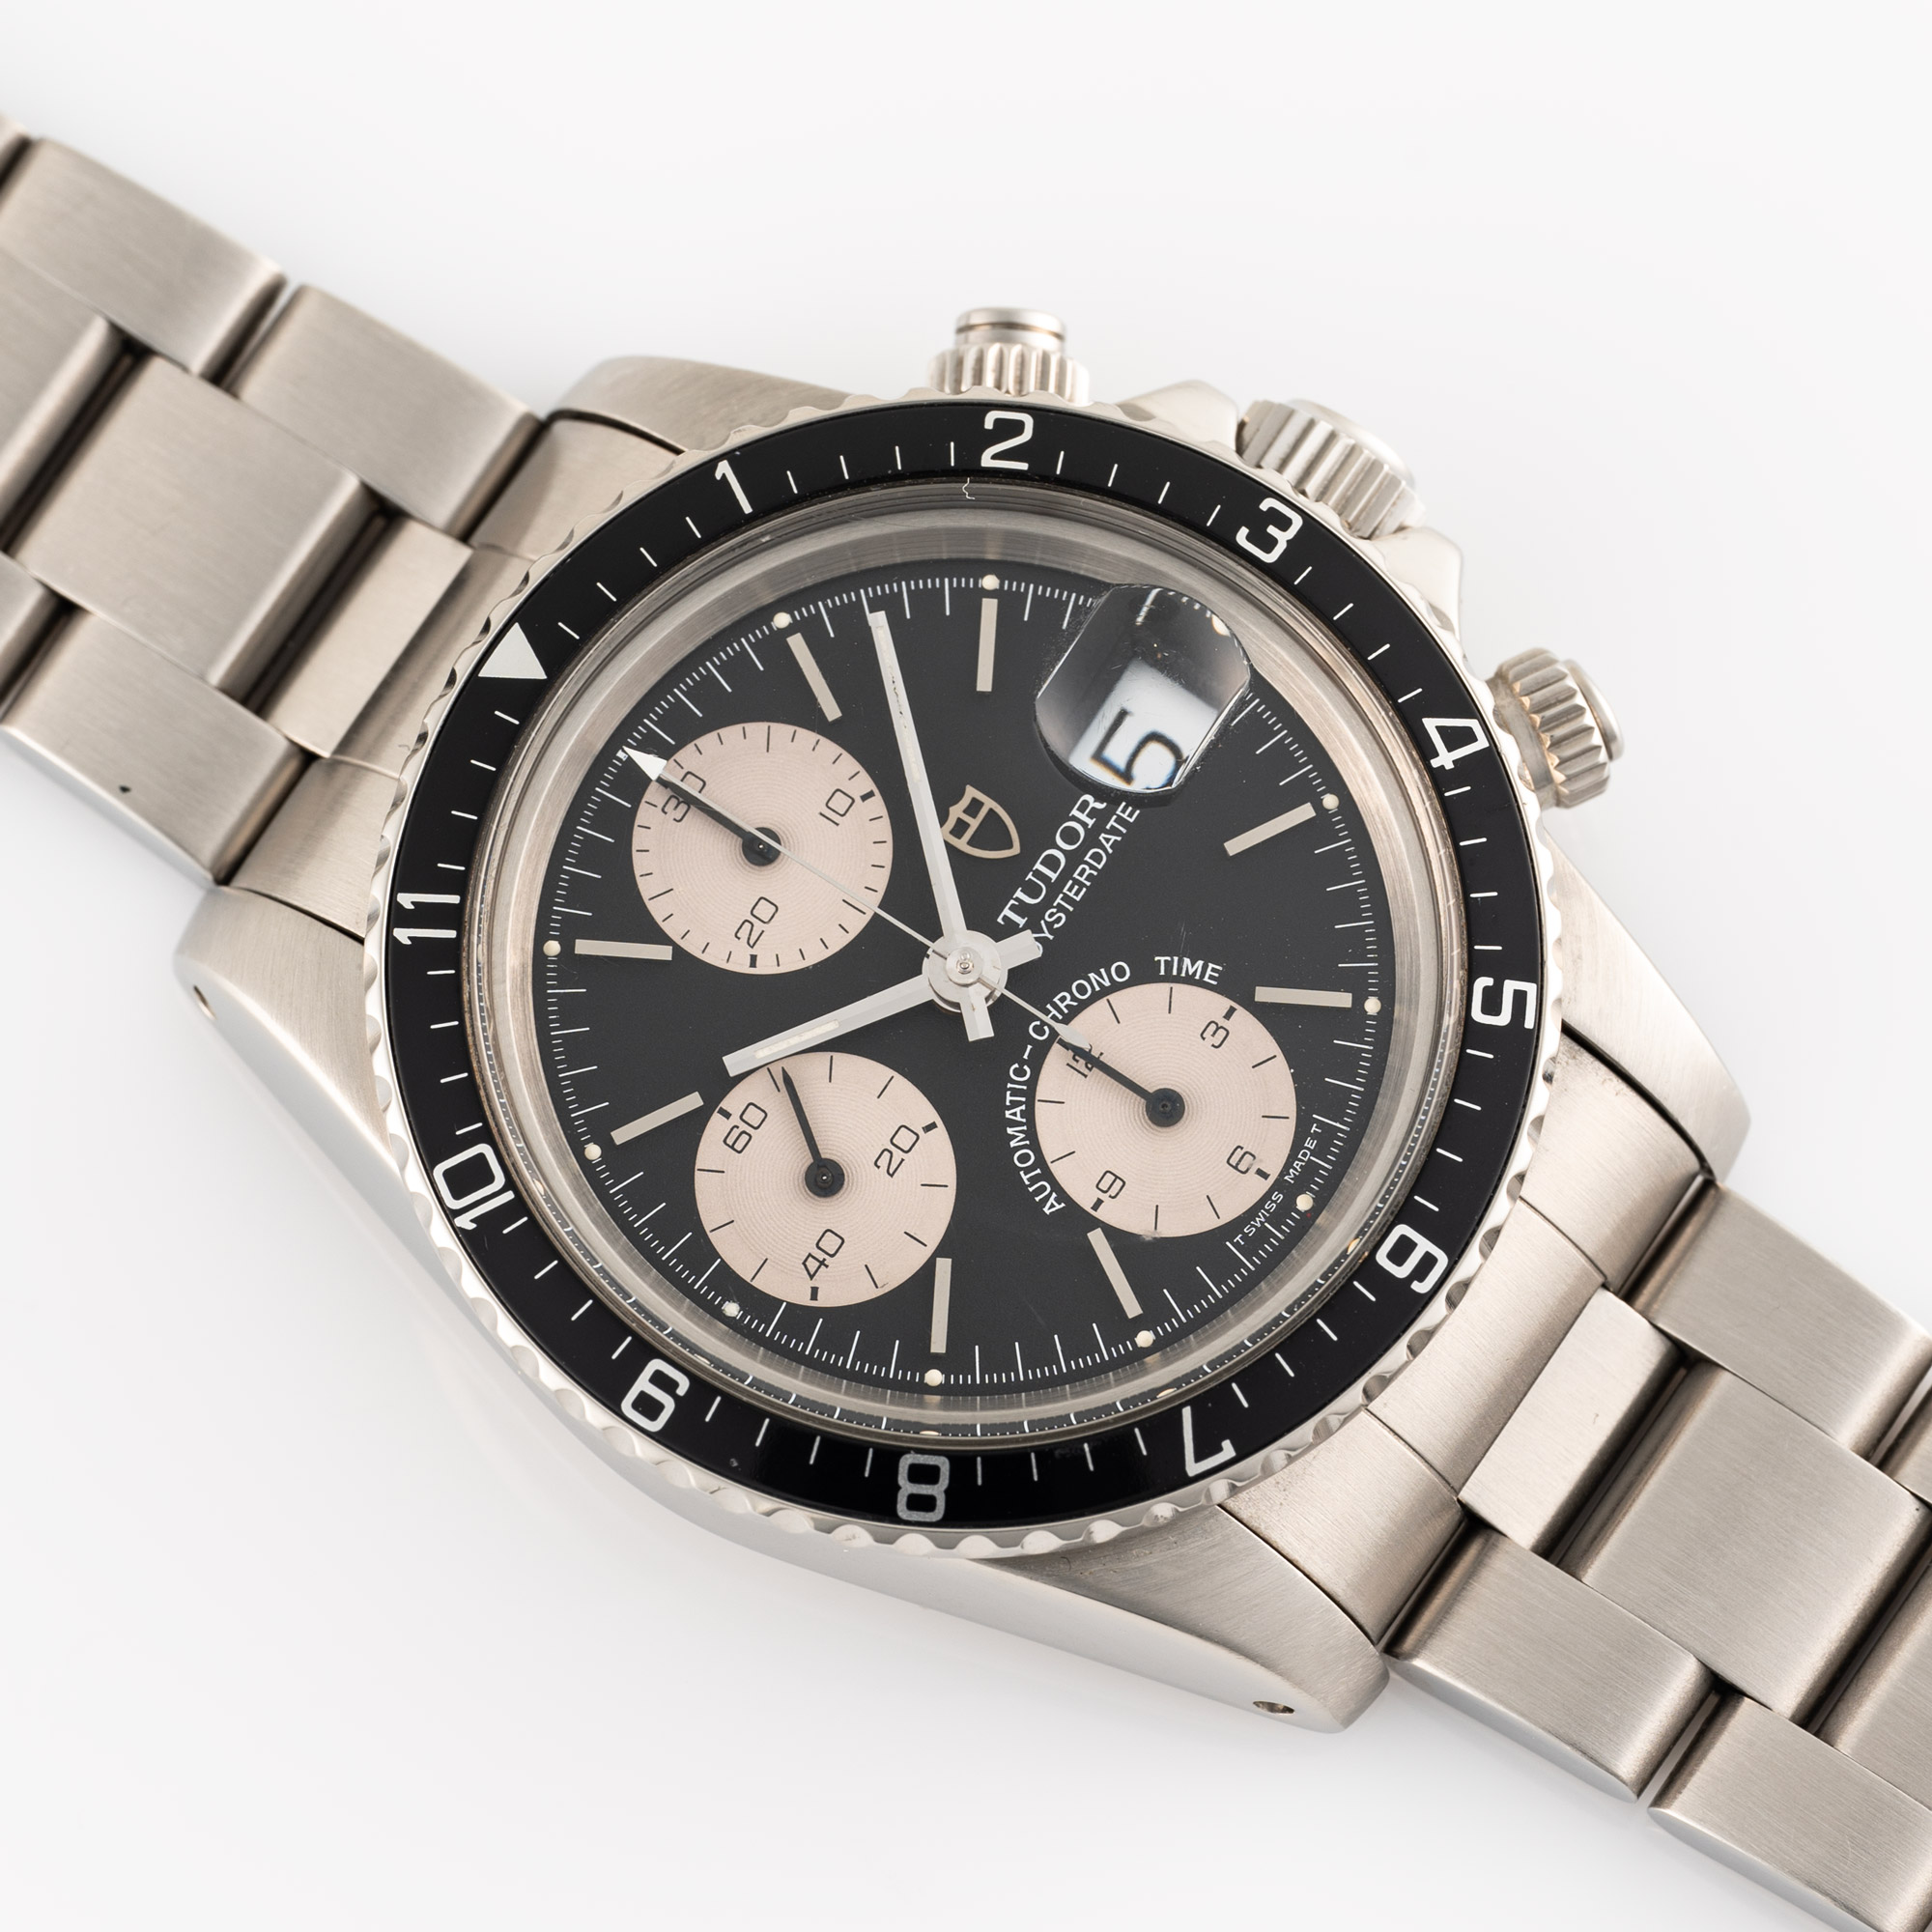 A GENTLEMAN'S SIZE STAINLESS STEEL ROLEX TUDOR OYSTERDATE AUTOMATIC CHRONO TIME "BIG BLOCK" - Image 4 of 10